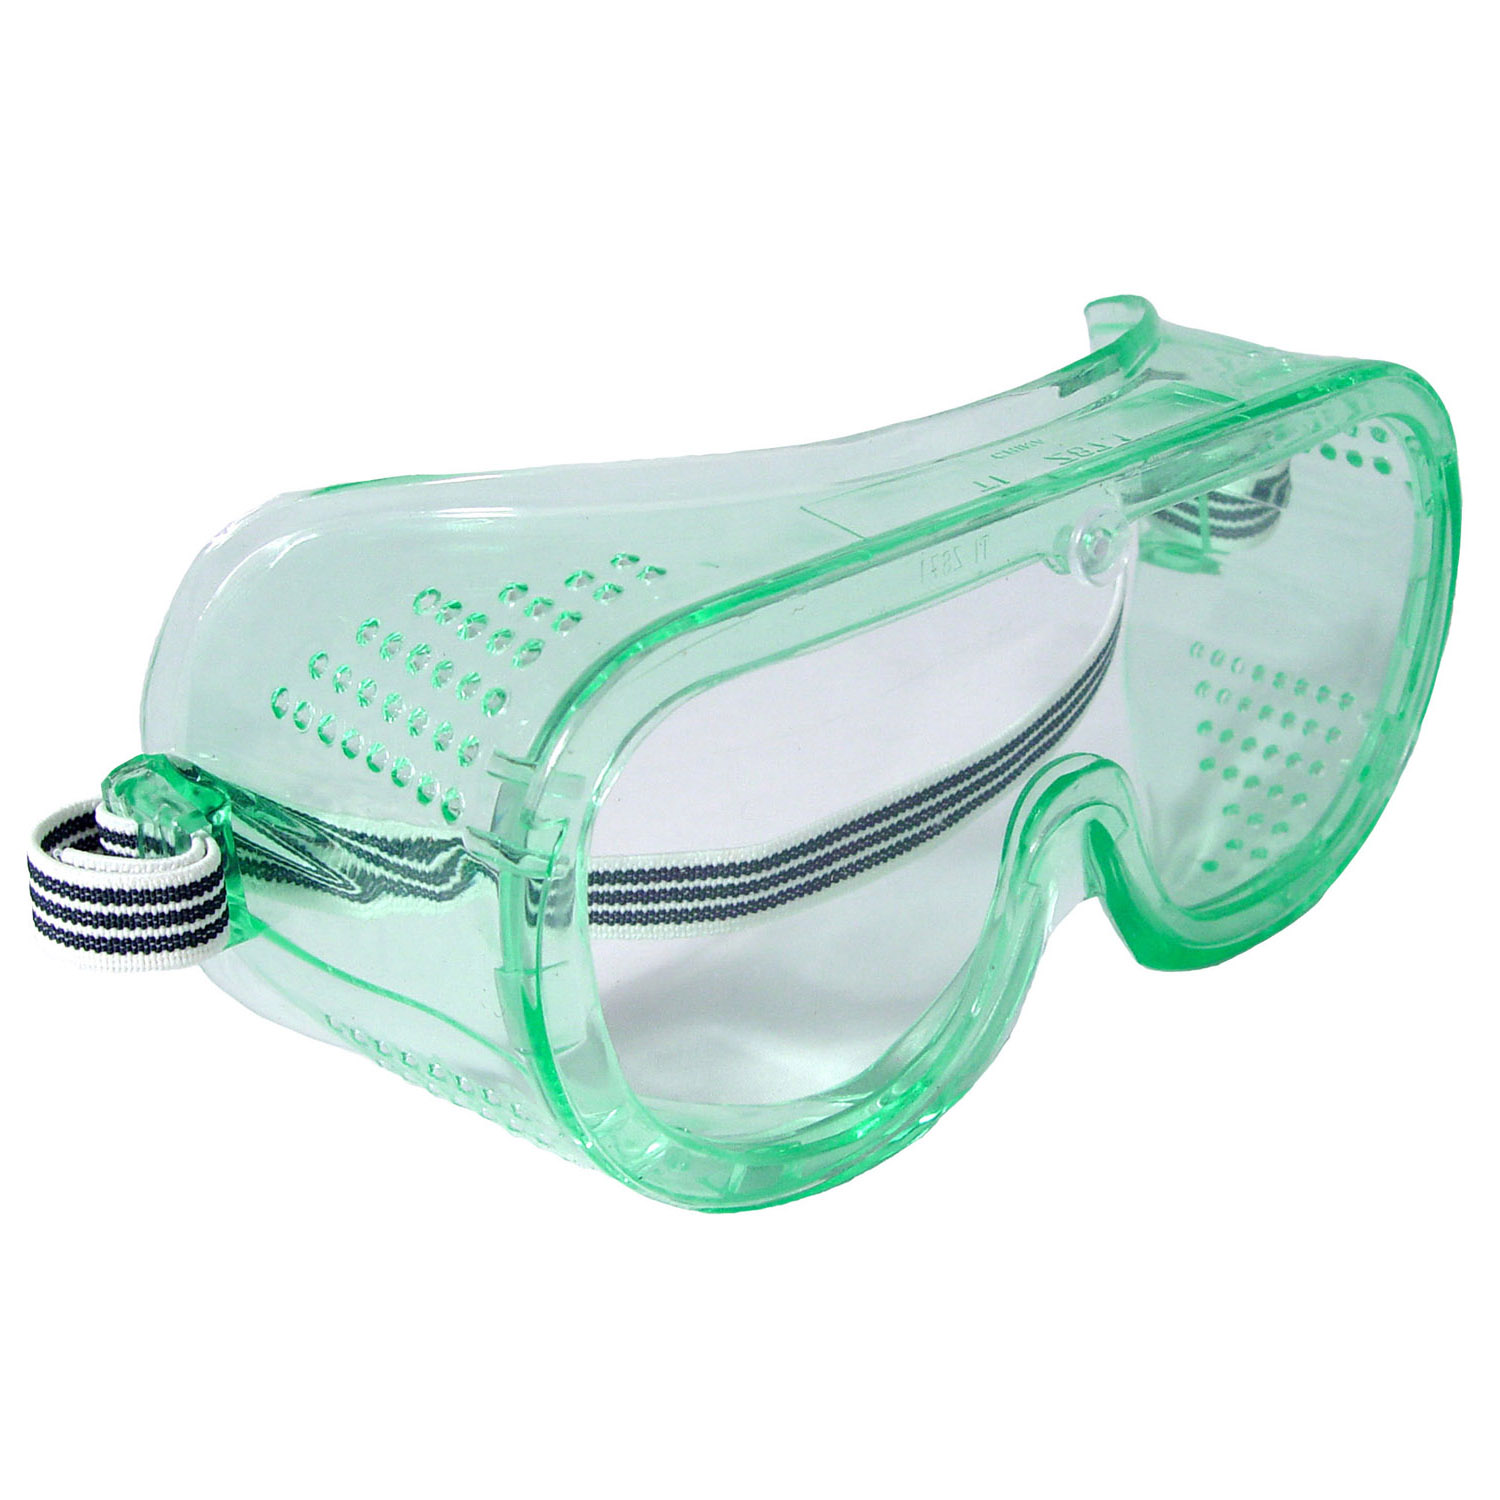 Perforated Safety Goggle - Clear Anti-Fog Lens